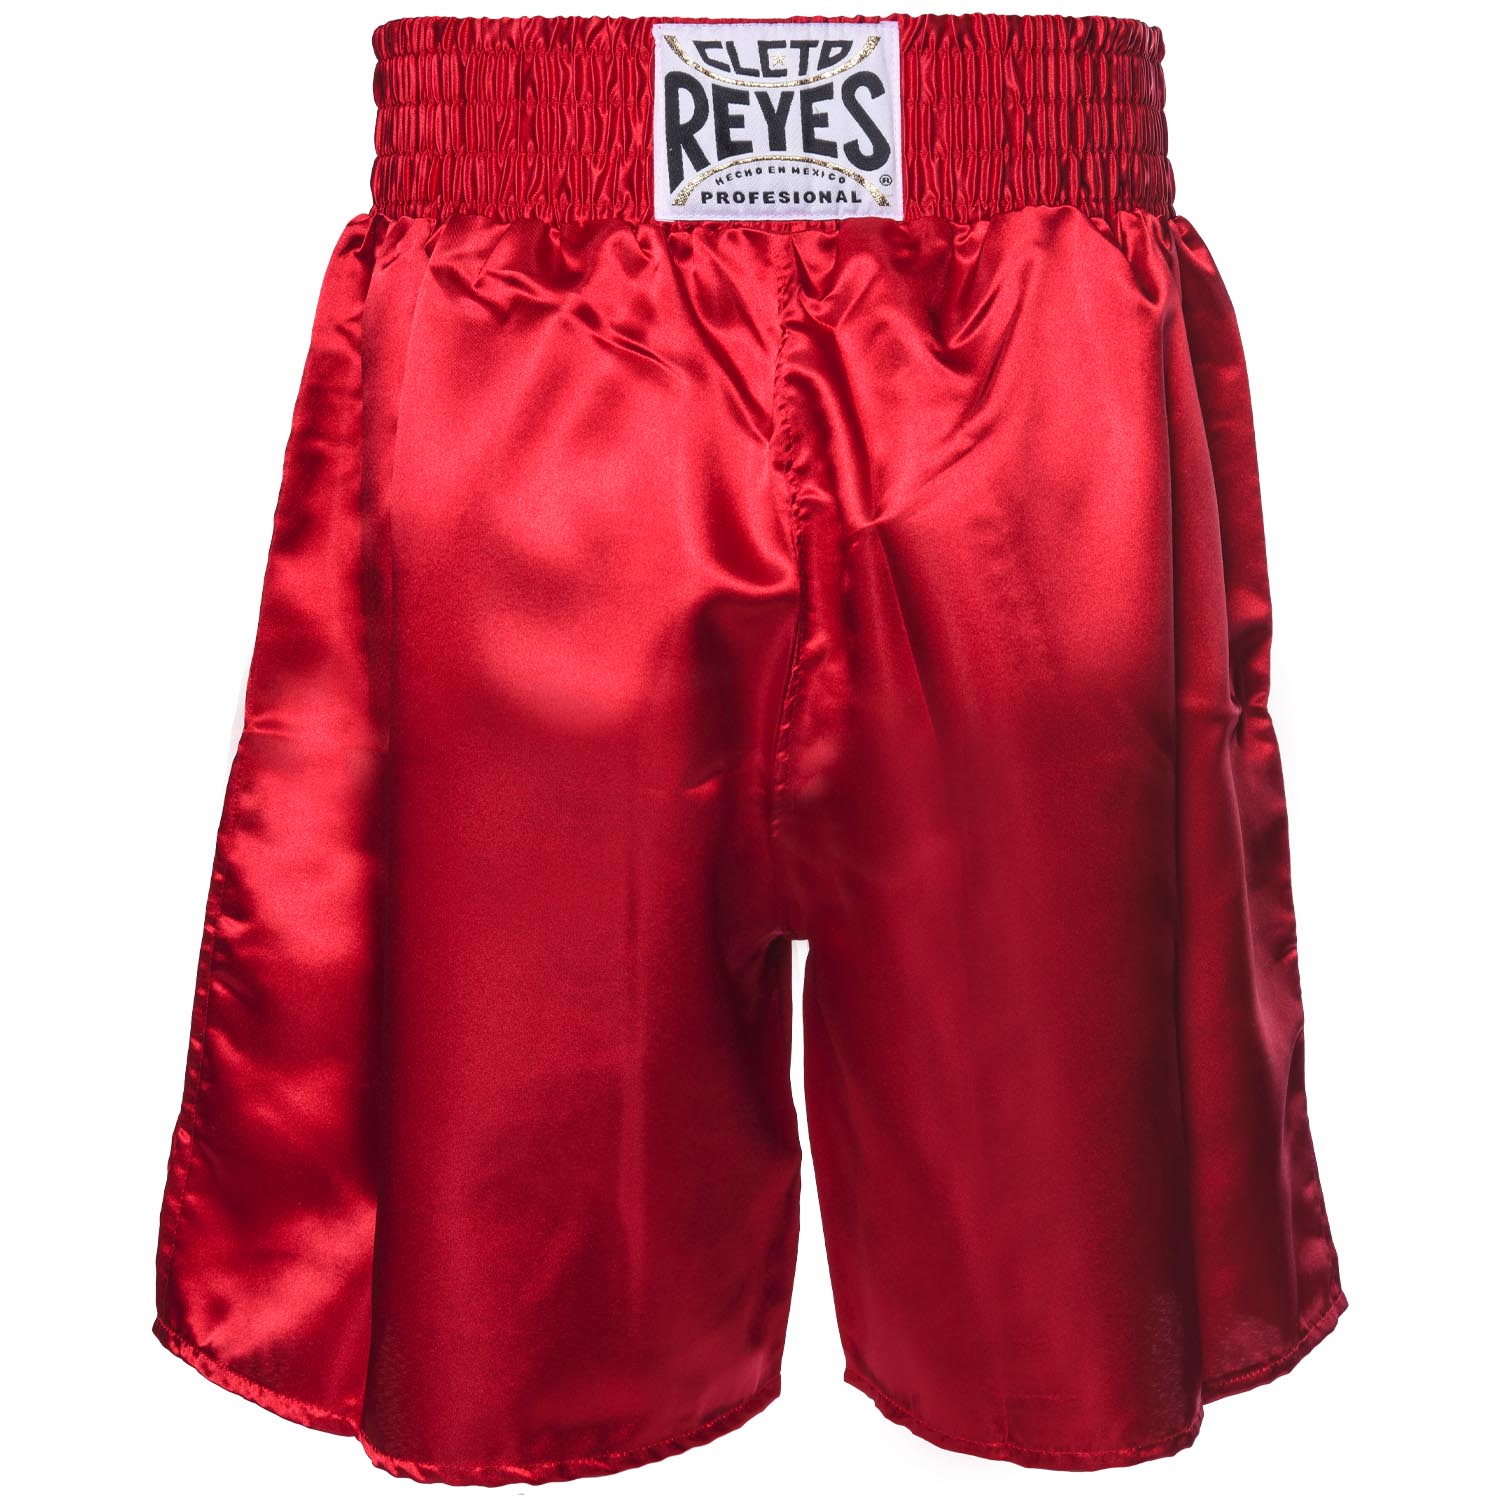 Cleto Reyes Boxing Shorts, Satin Classic, red, S